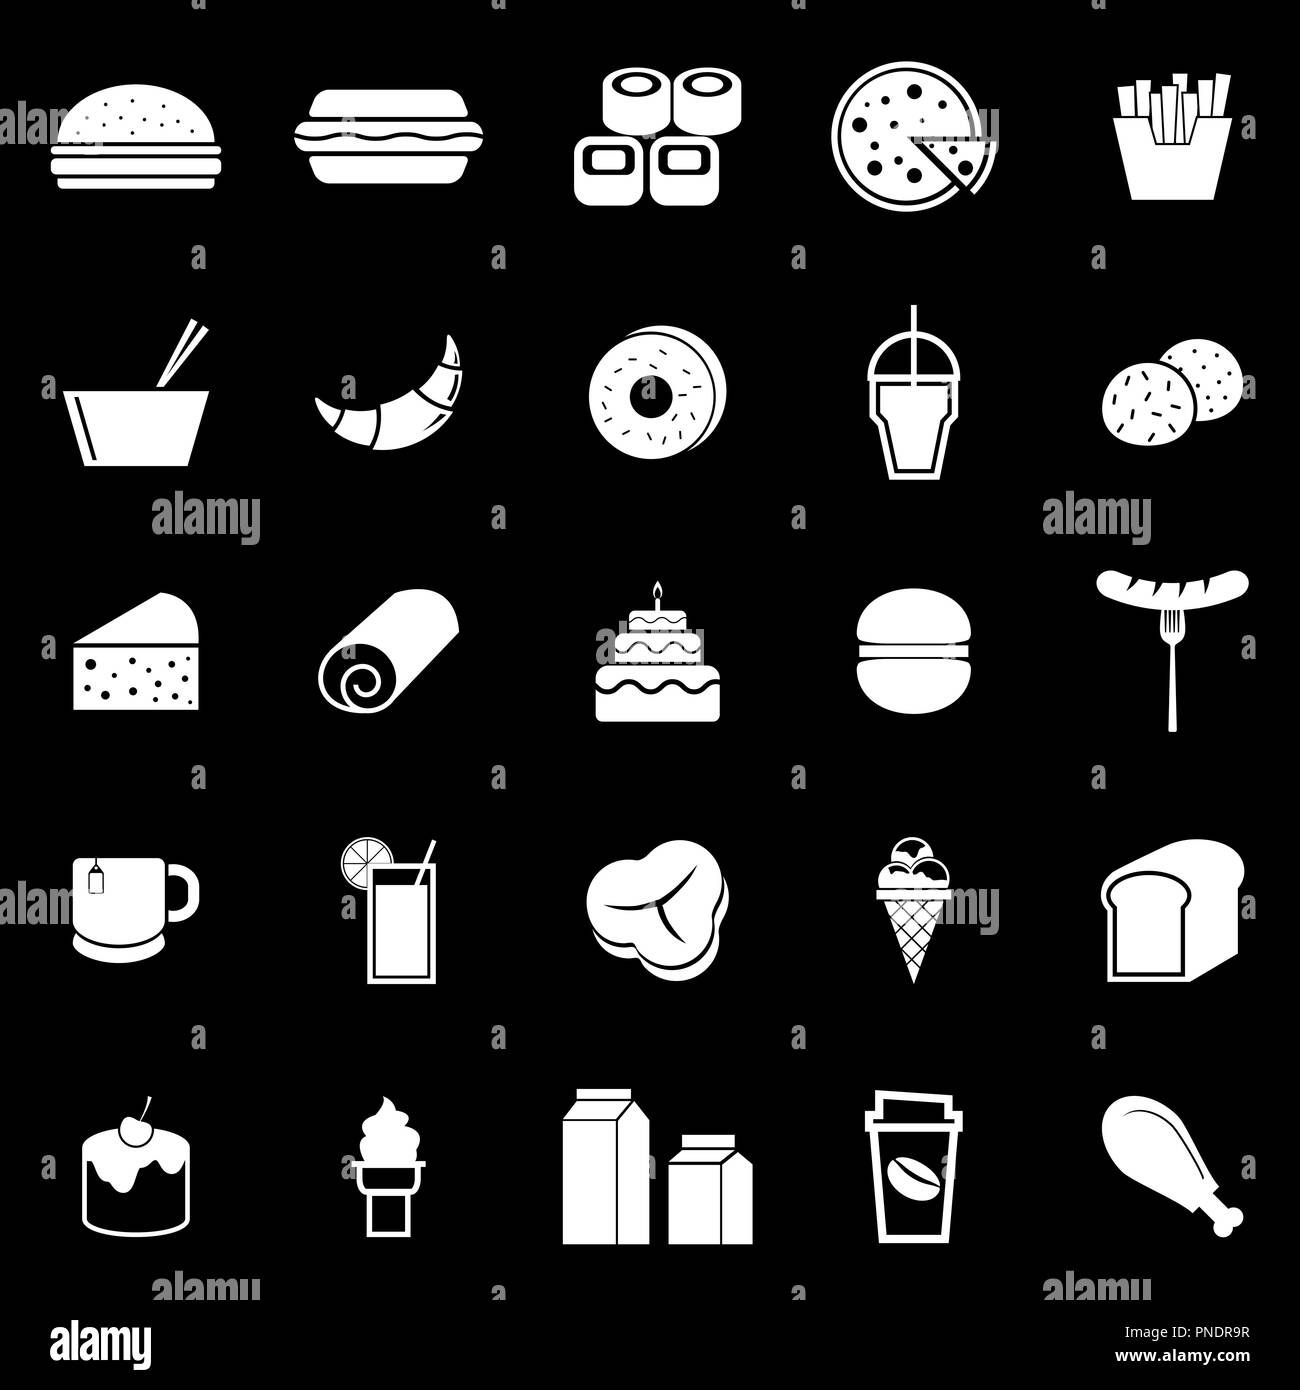 Popular food icons on black background, stock vector Stock Vector